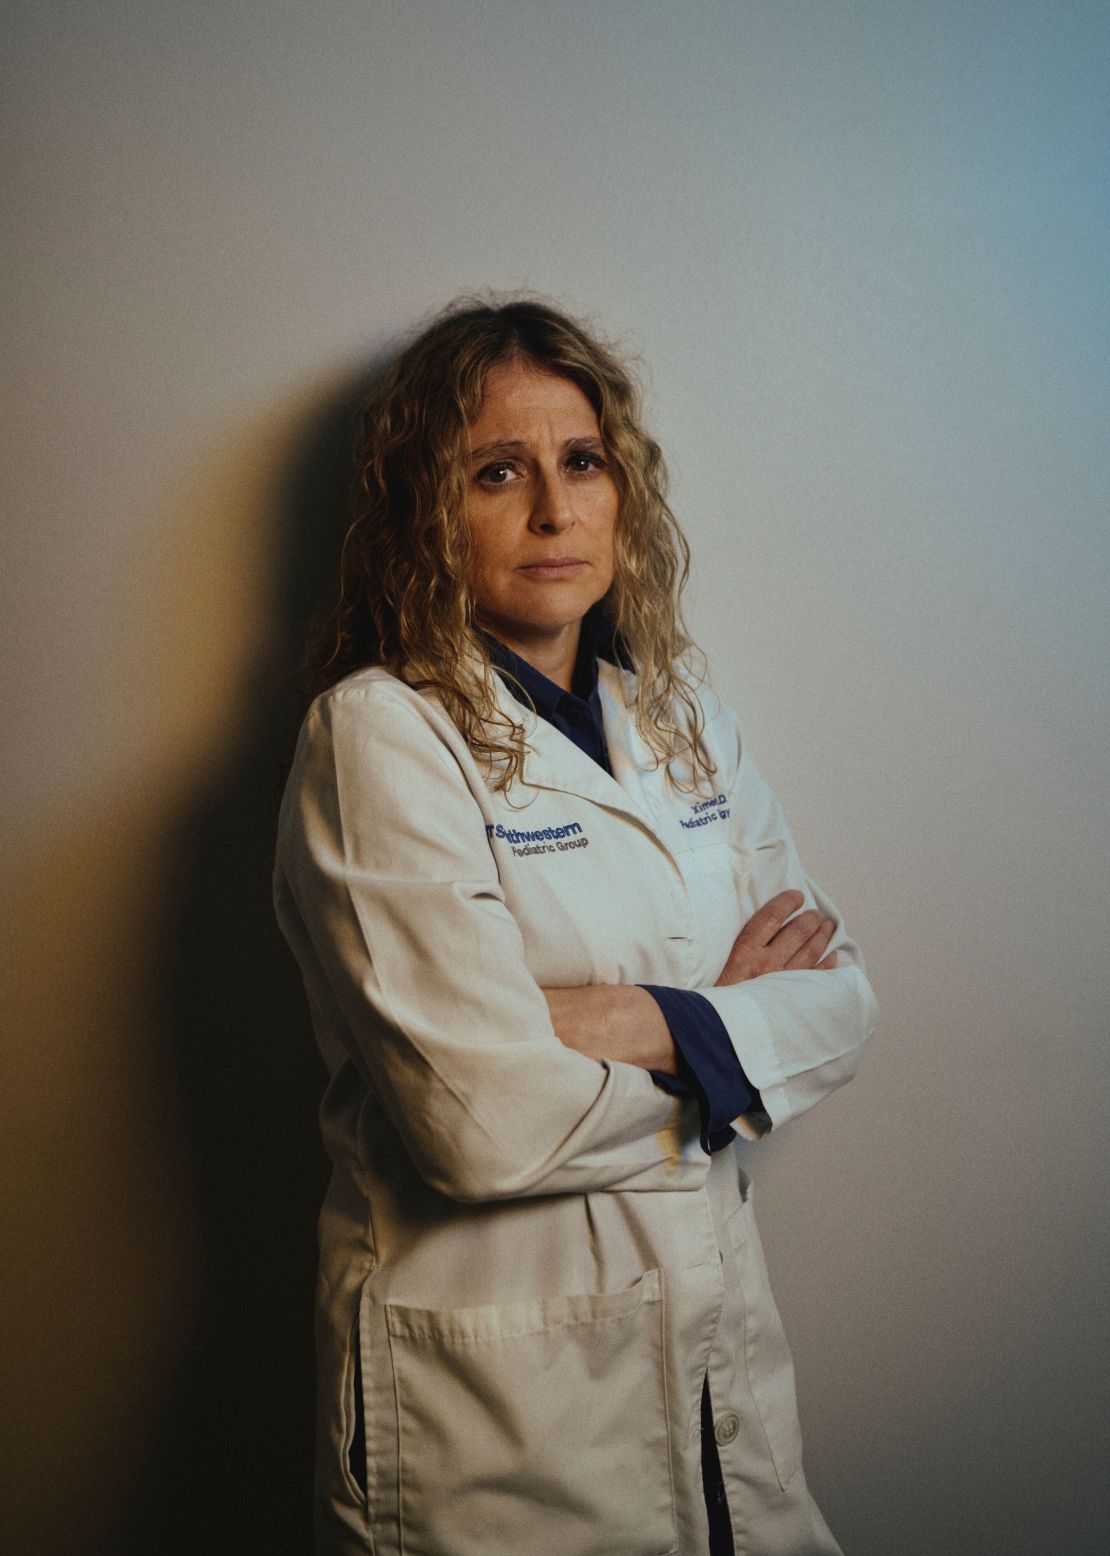 Dr. Ximena Lopez, a pediatric endocrinologist who said she is moving from Texas to California, in Dallas, May 23, 2023.  Laws in 20 states have left the fate of clinics in doubt and families with transgender children searching for medical care across state lines. (Abigail Enright/The New York Times)